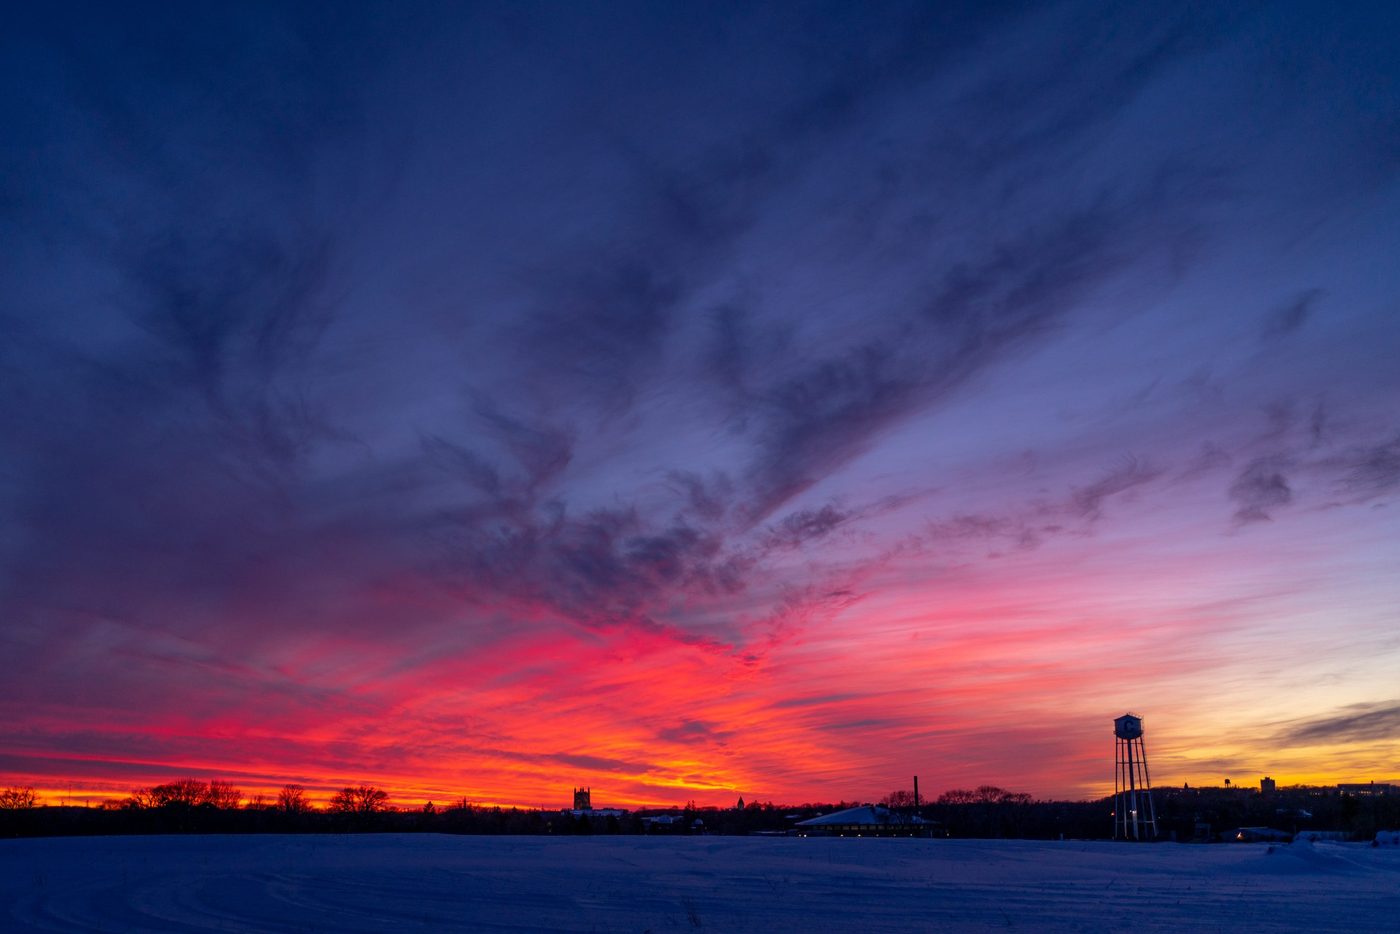 Colorful winter sunset overlooking a field with the Carleton water town and Skinner chapel peaking in the distance